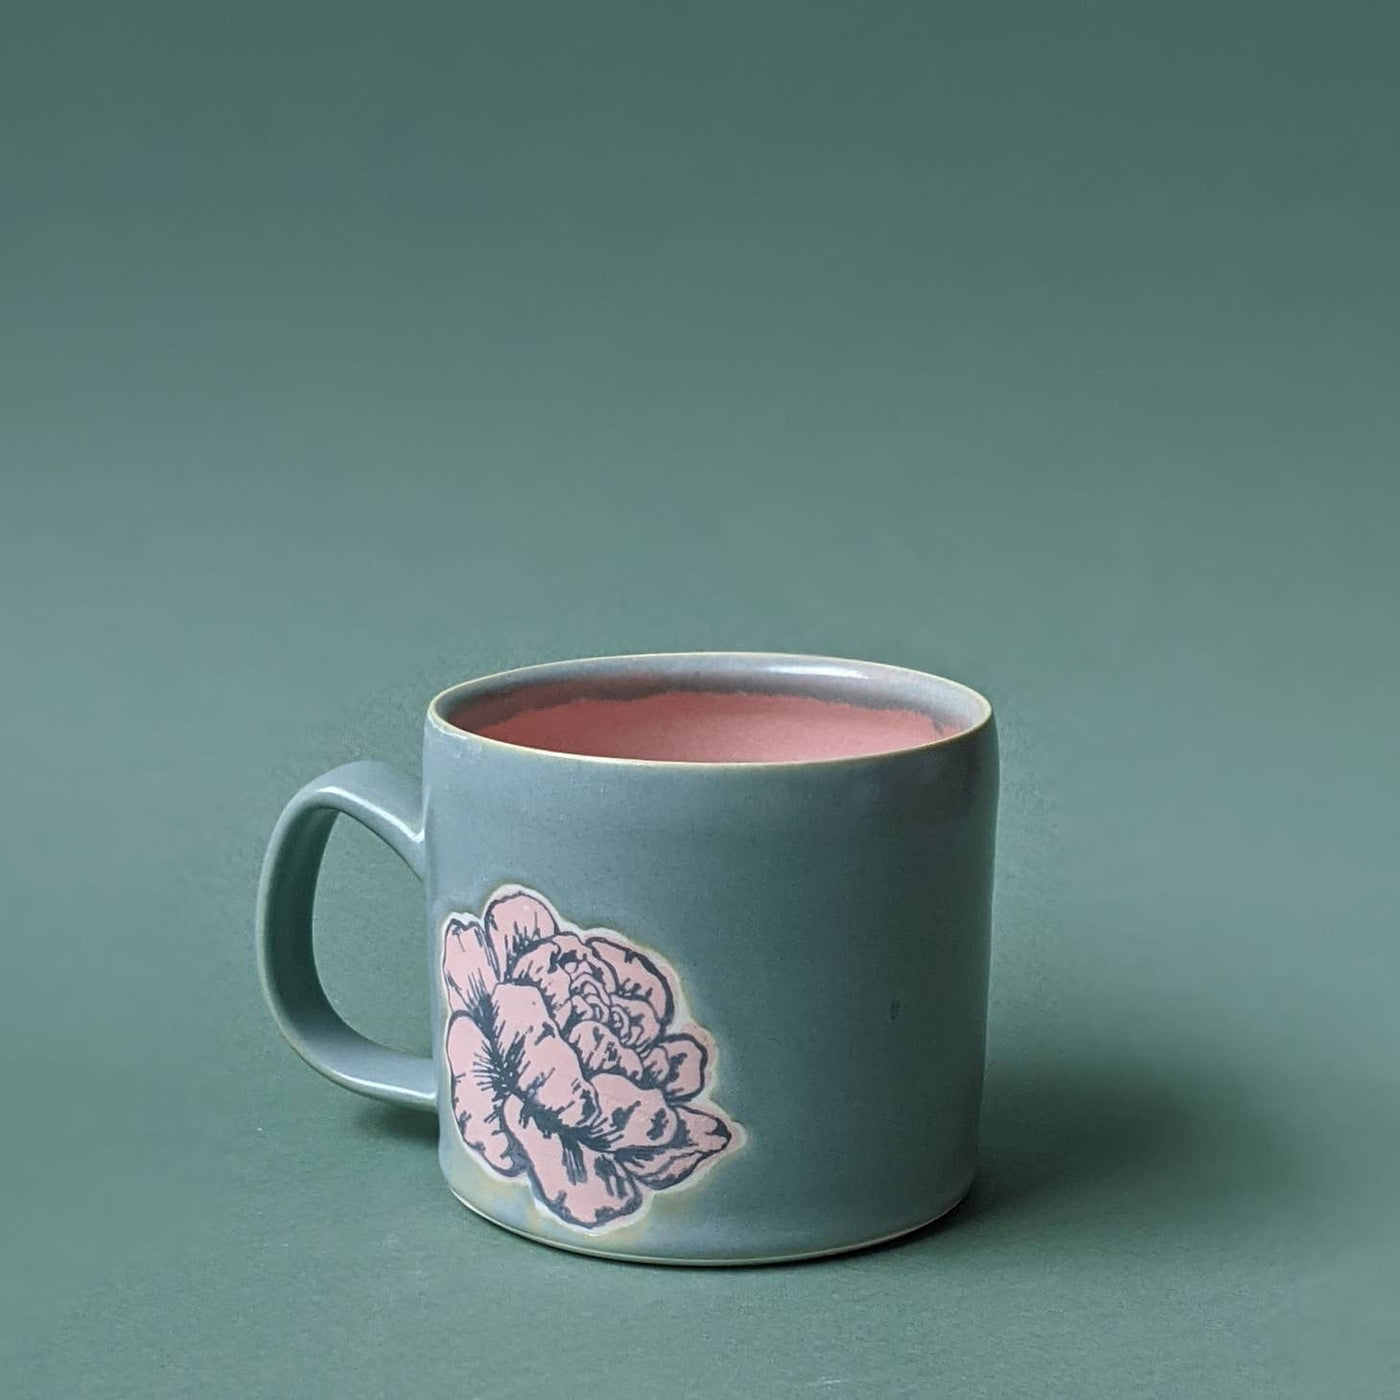 Pale blue mug with pink peony handcrafted on it